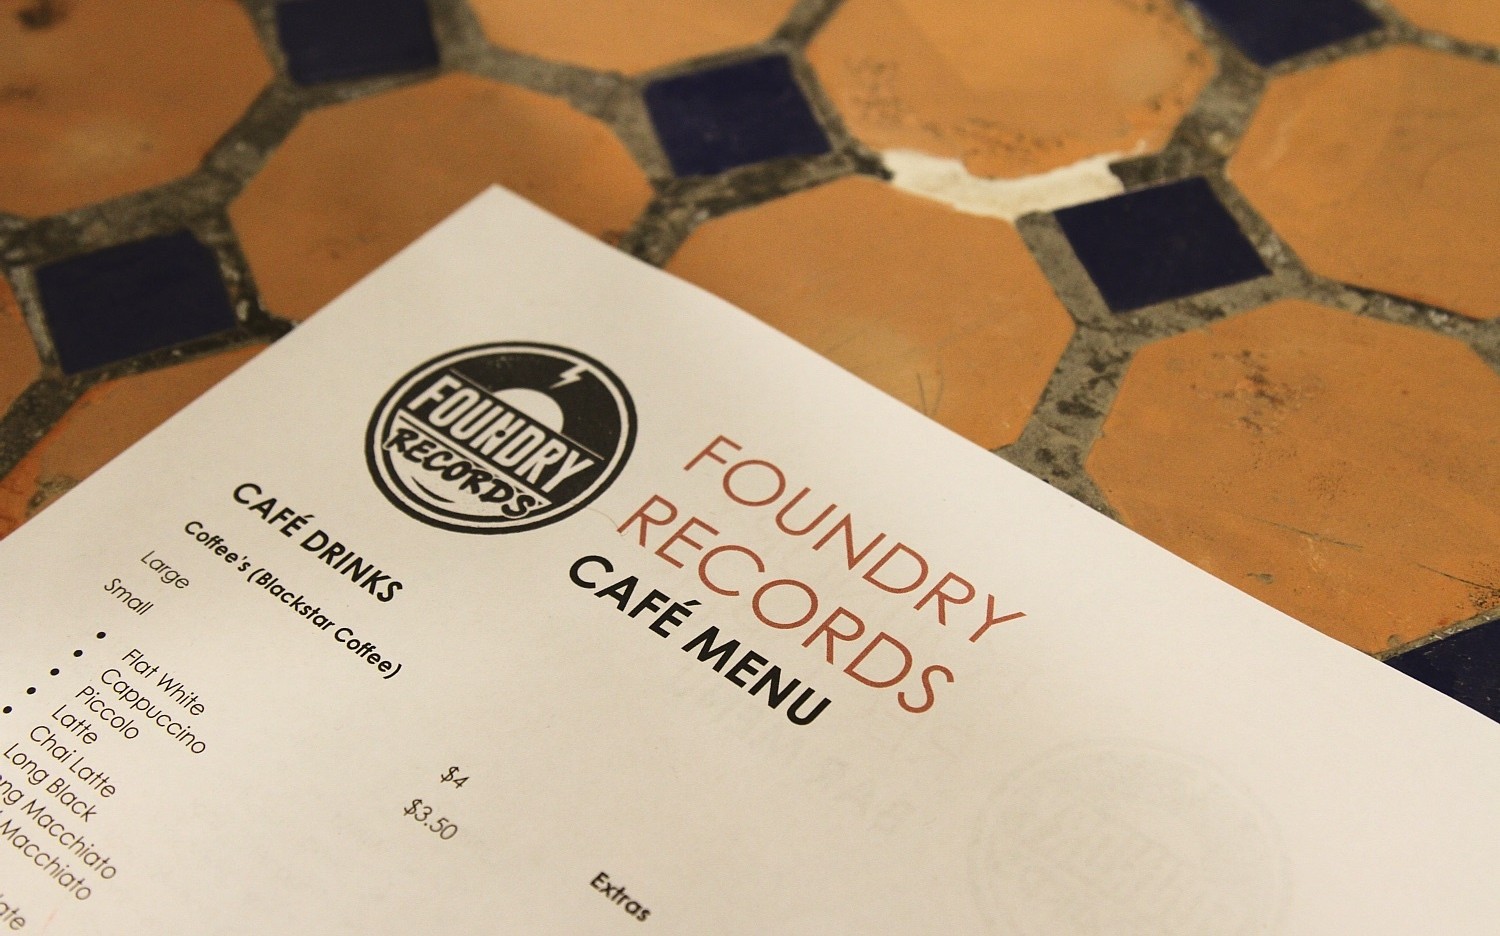 The Foundry and Foundry Records